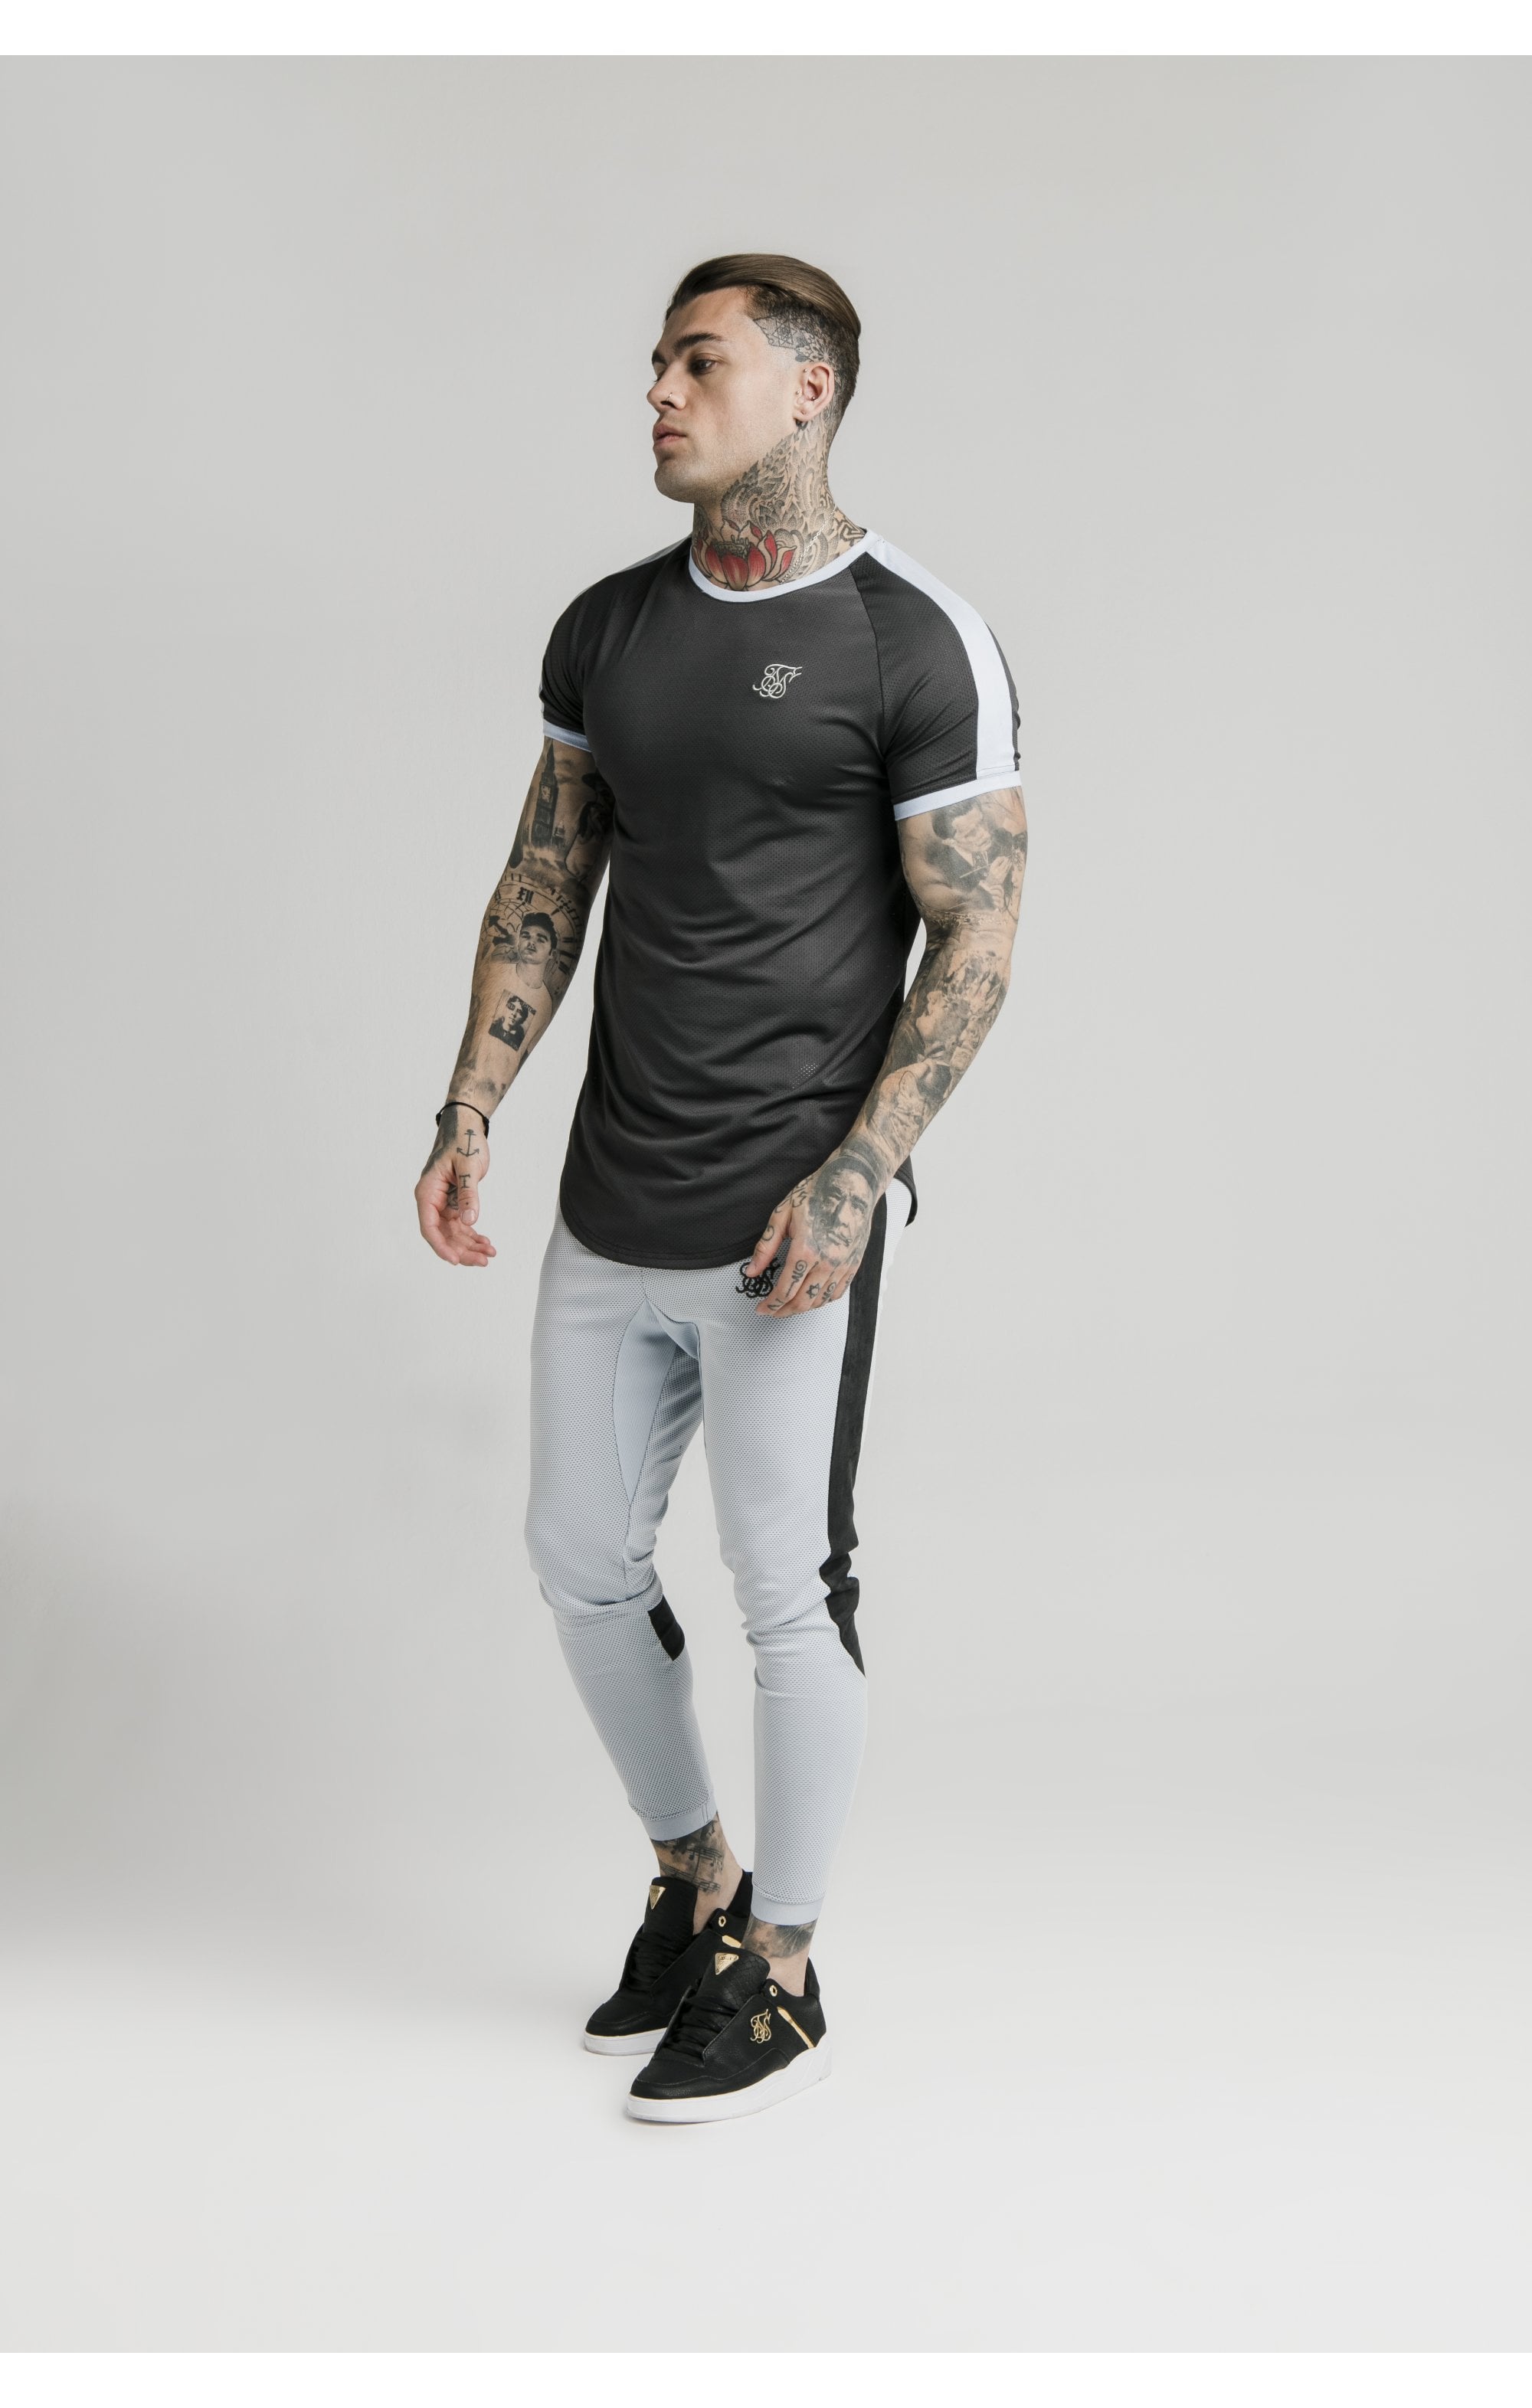 Load image into Gallery viewer, SikSilk S/S Eyelet Tech Tee – Charcoal Grey (4)